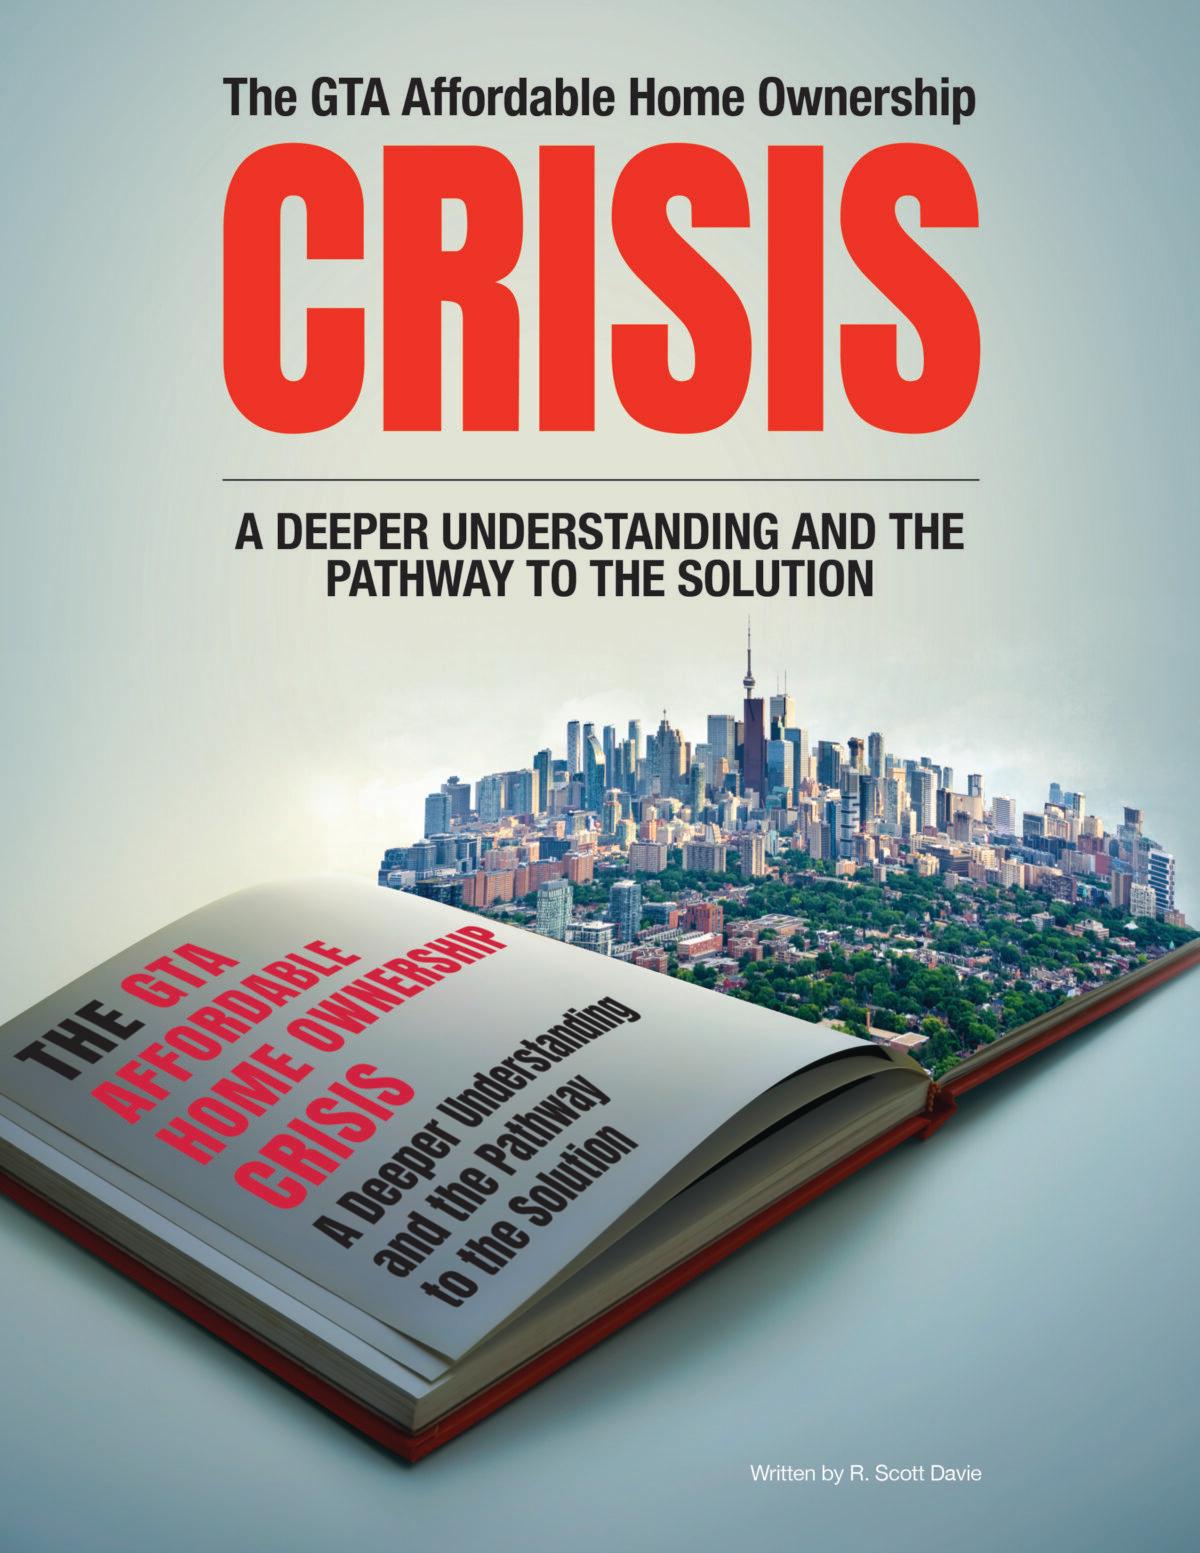 This definitive book sheds light on the GTA affordable home ownership crisis and offers solutions. (Courtesy R. Scott Davie)